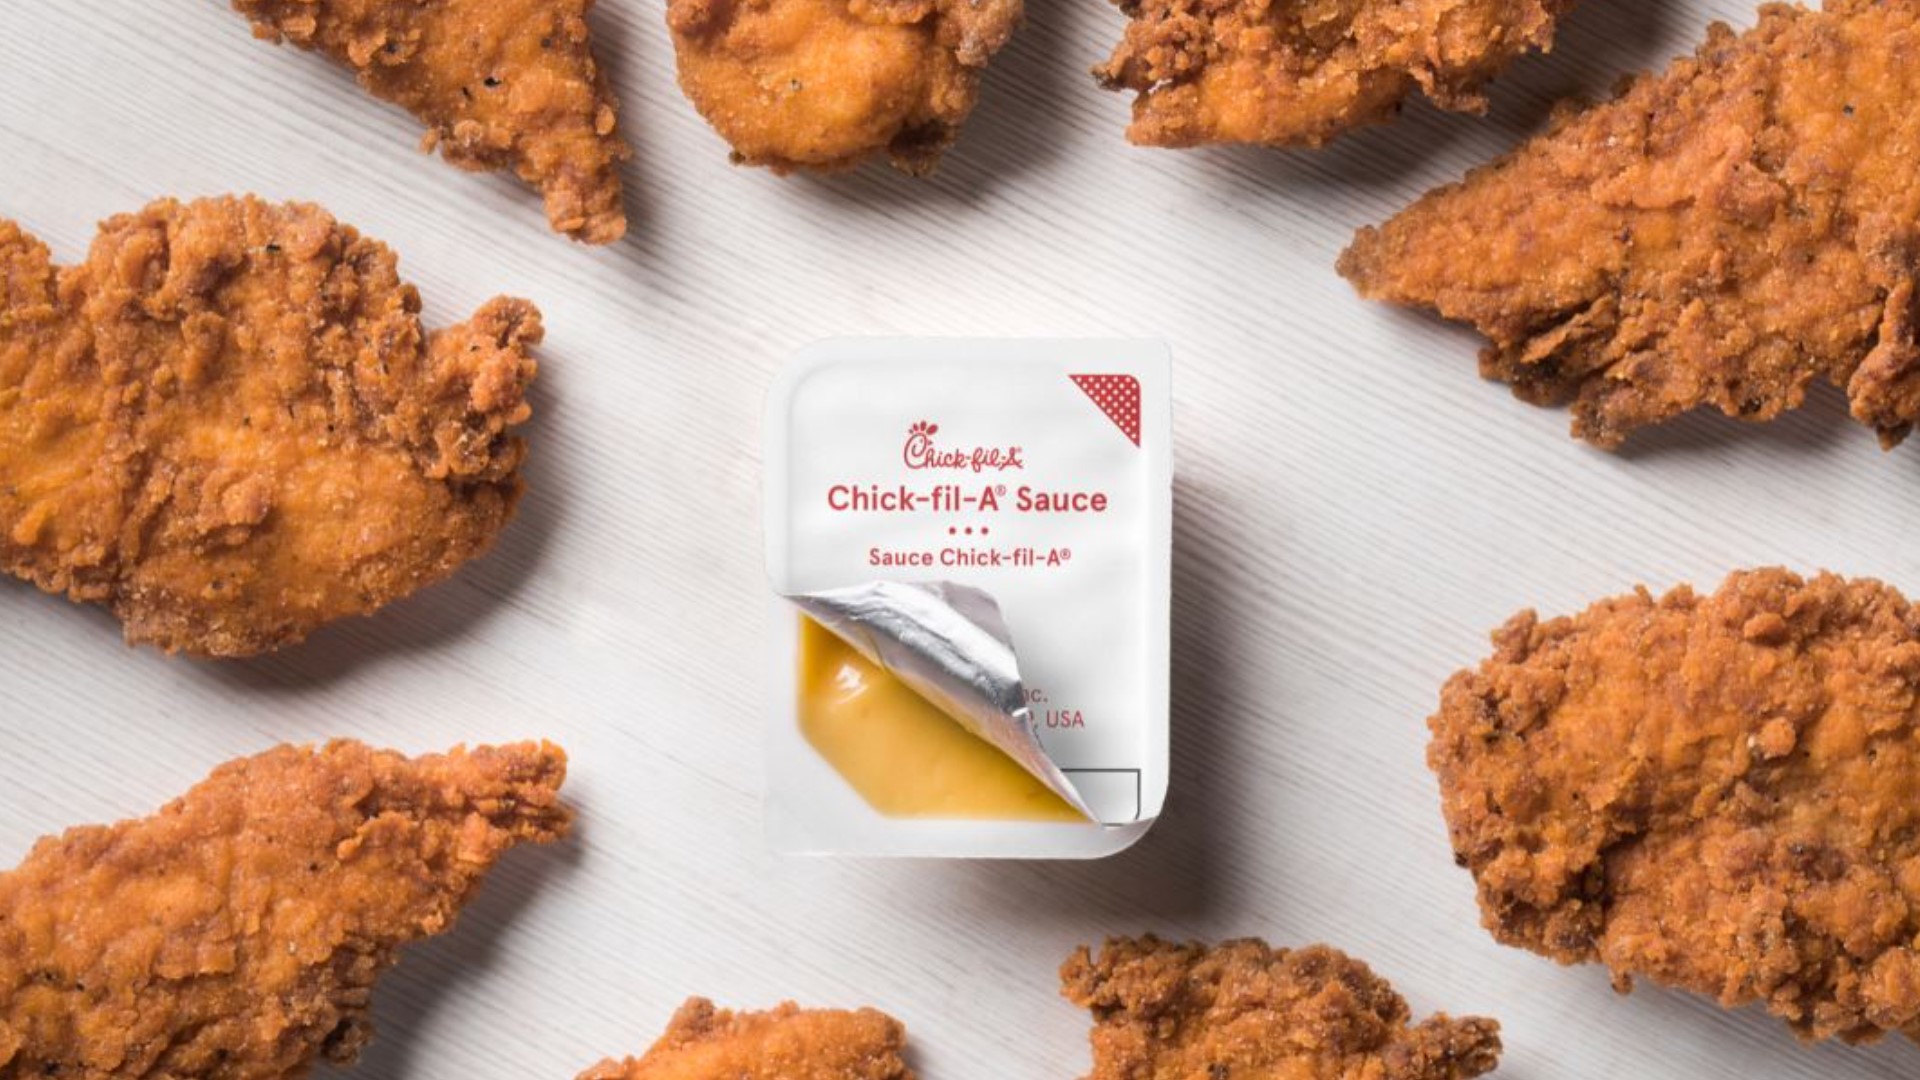 Many of the fast-food chain's locations across the country are only giving out one dipping sauce cup per entrée order right now.